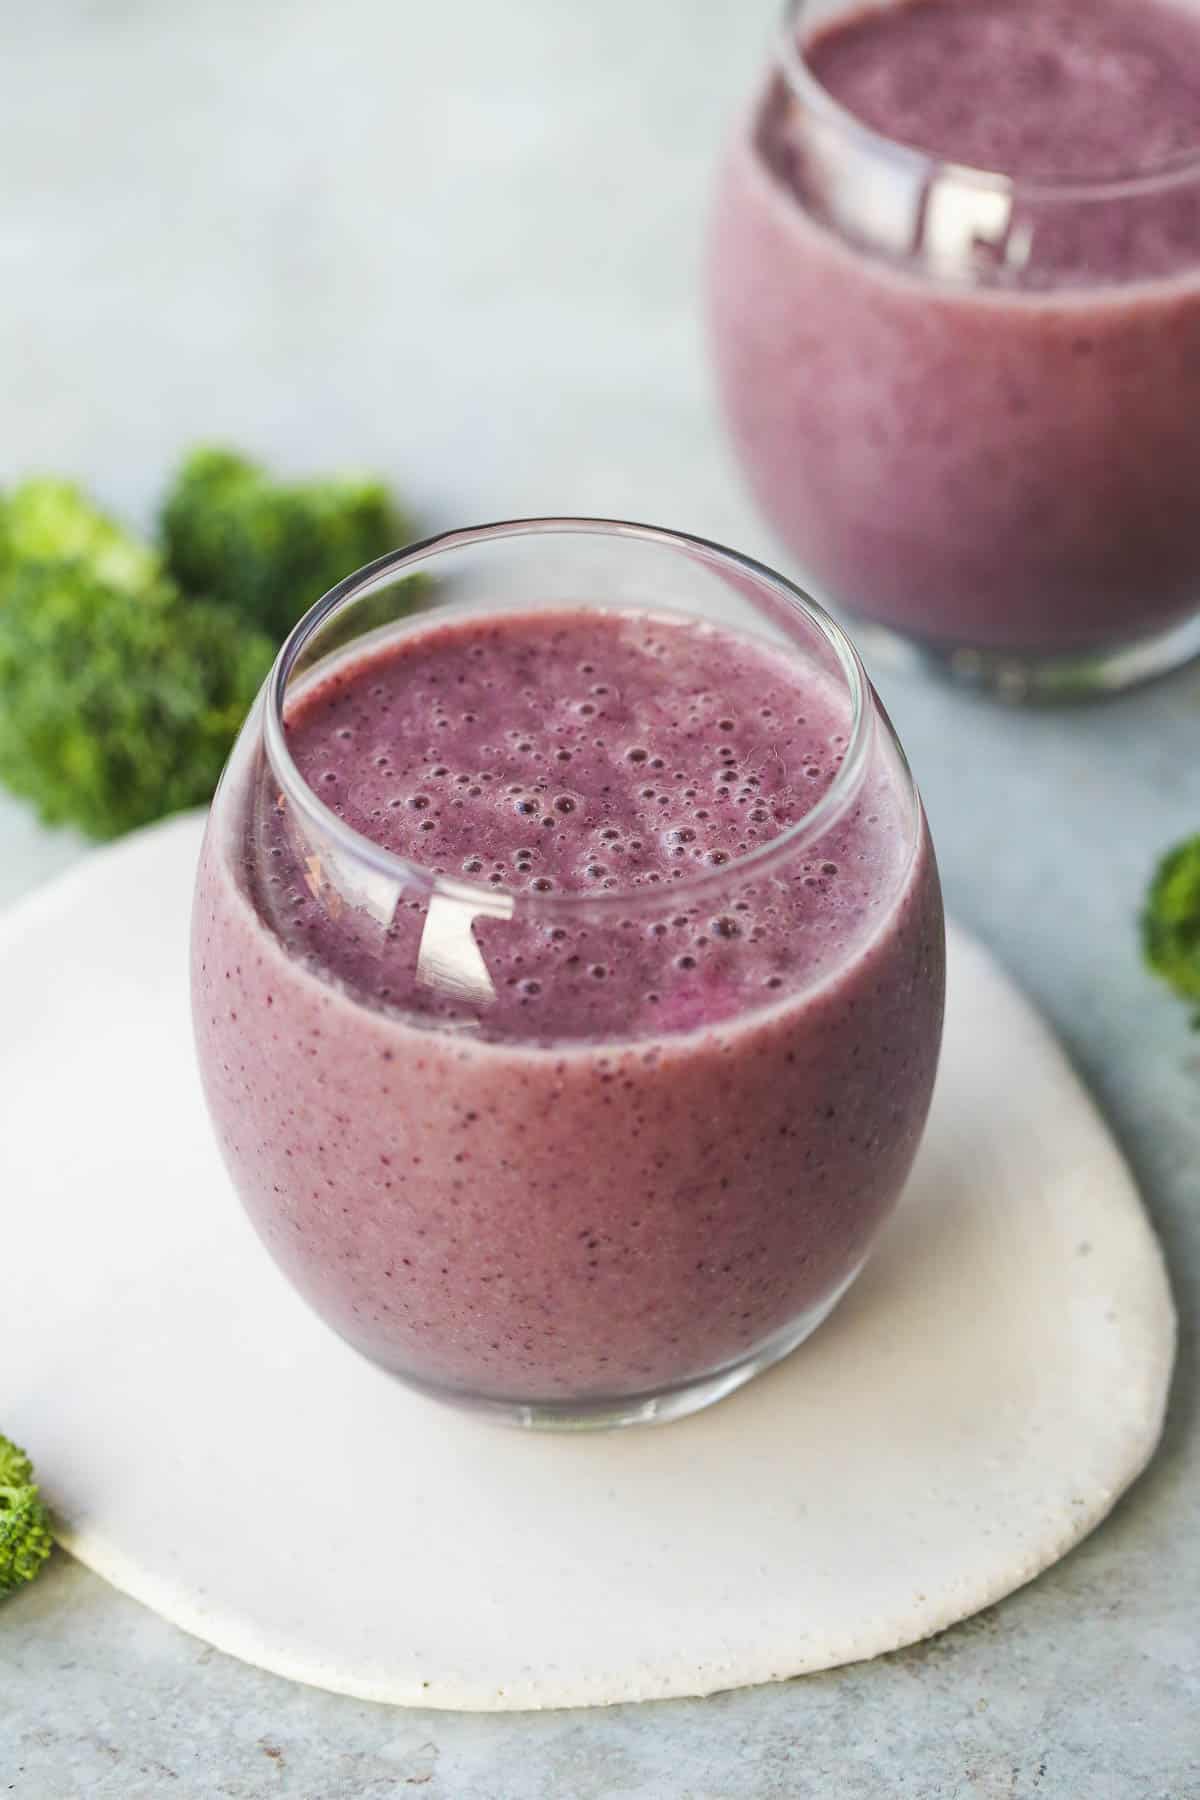 Blueberry Broccoli Smoothie served in two glasses.